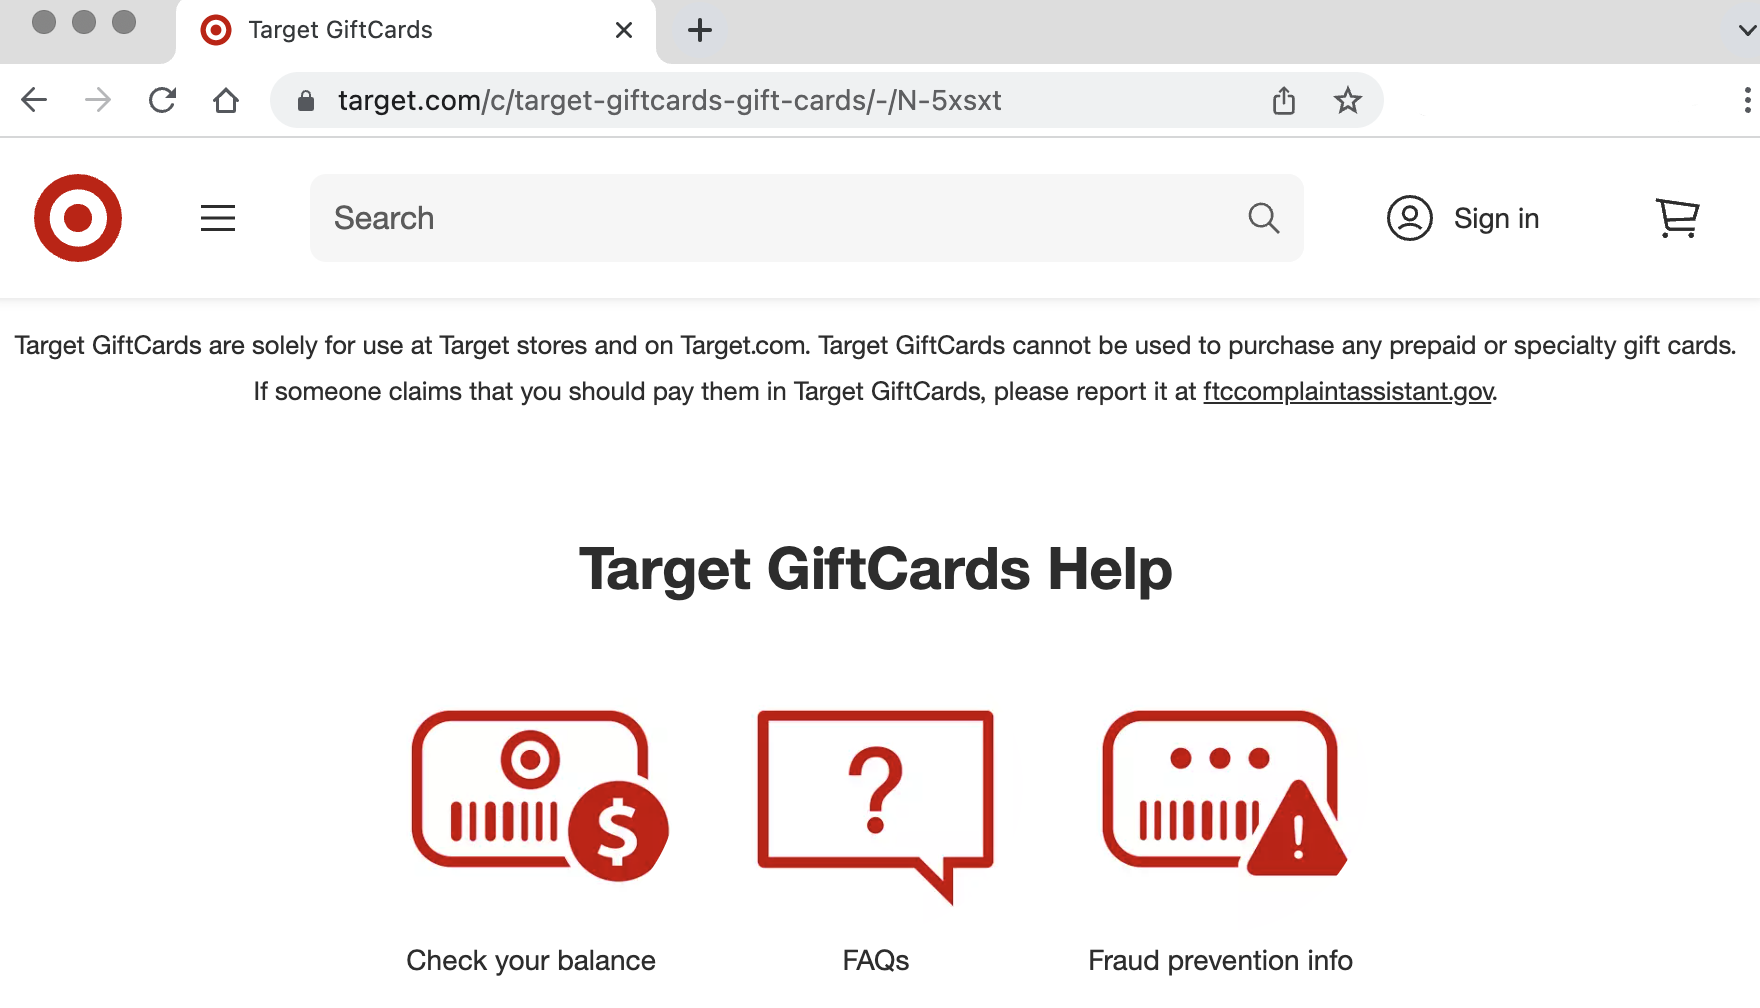 The Target GiftCards Help webpage.